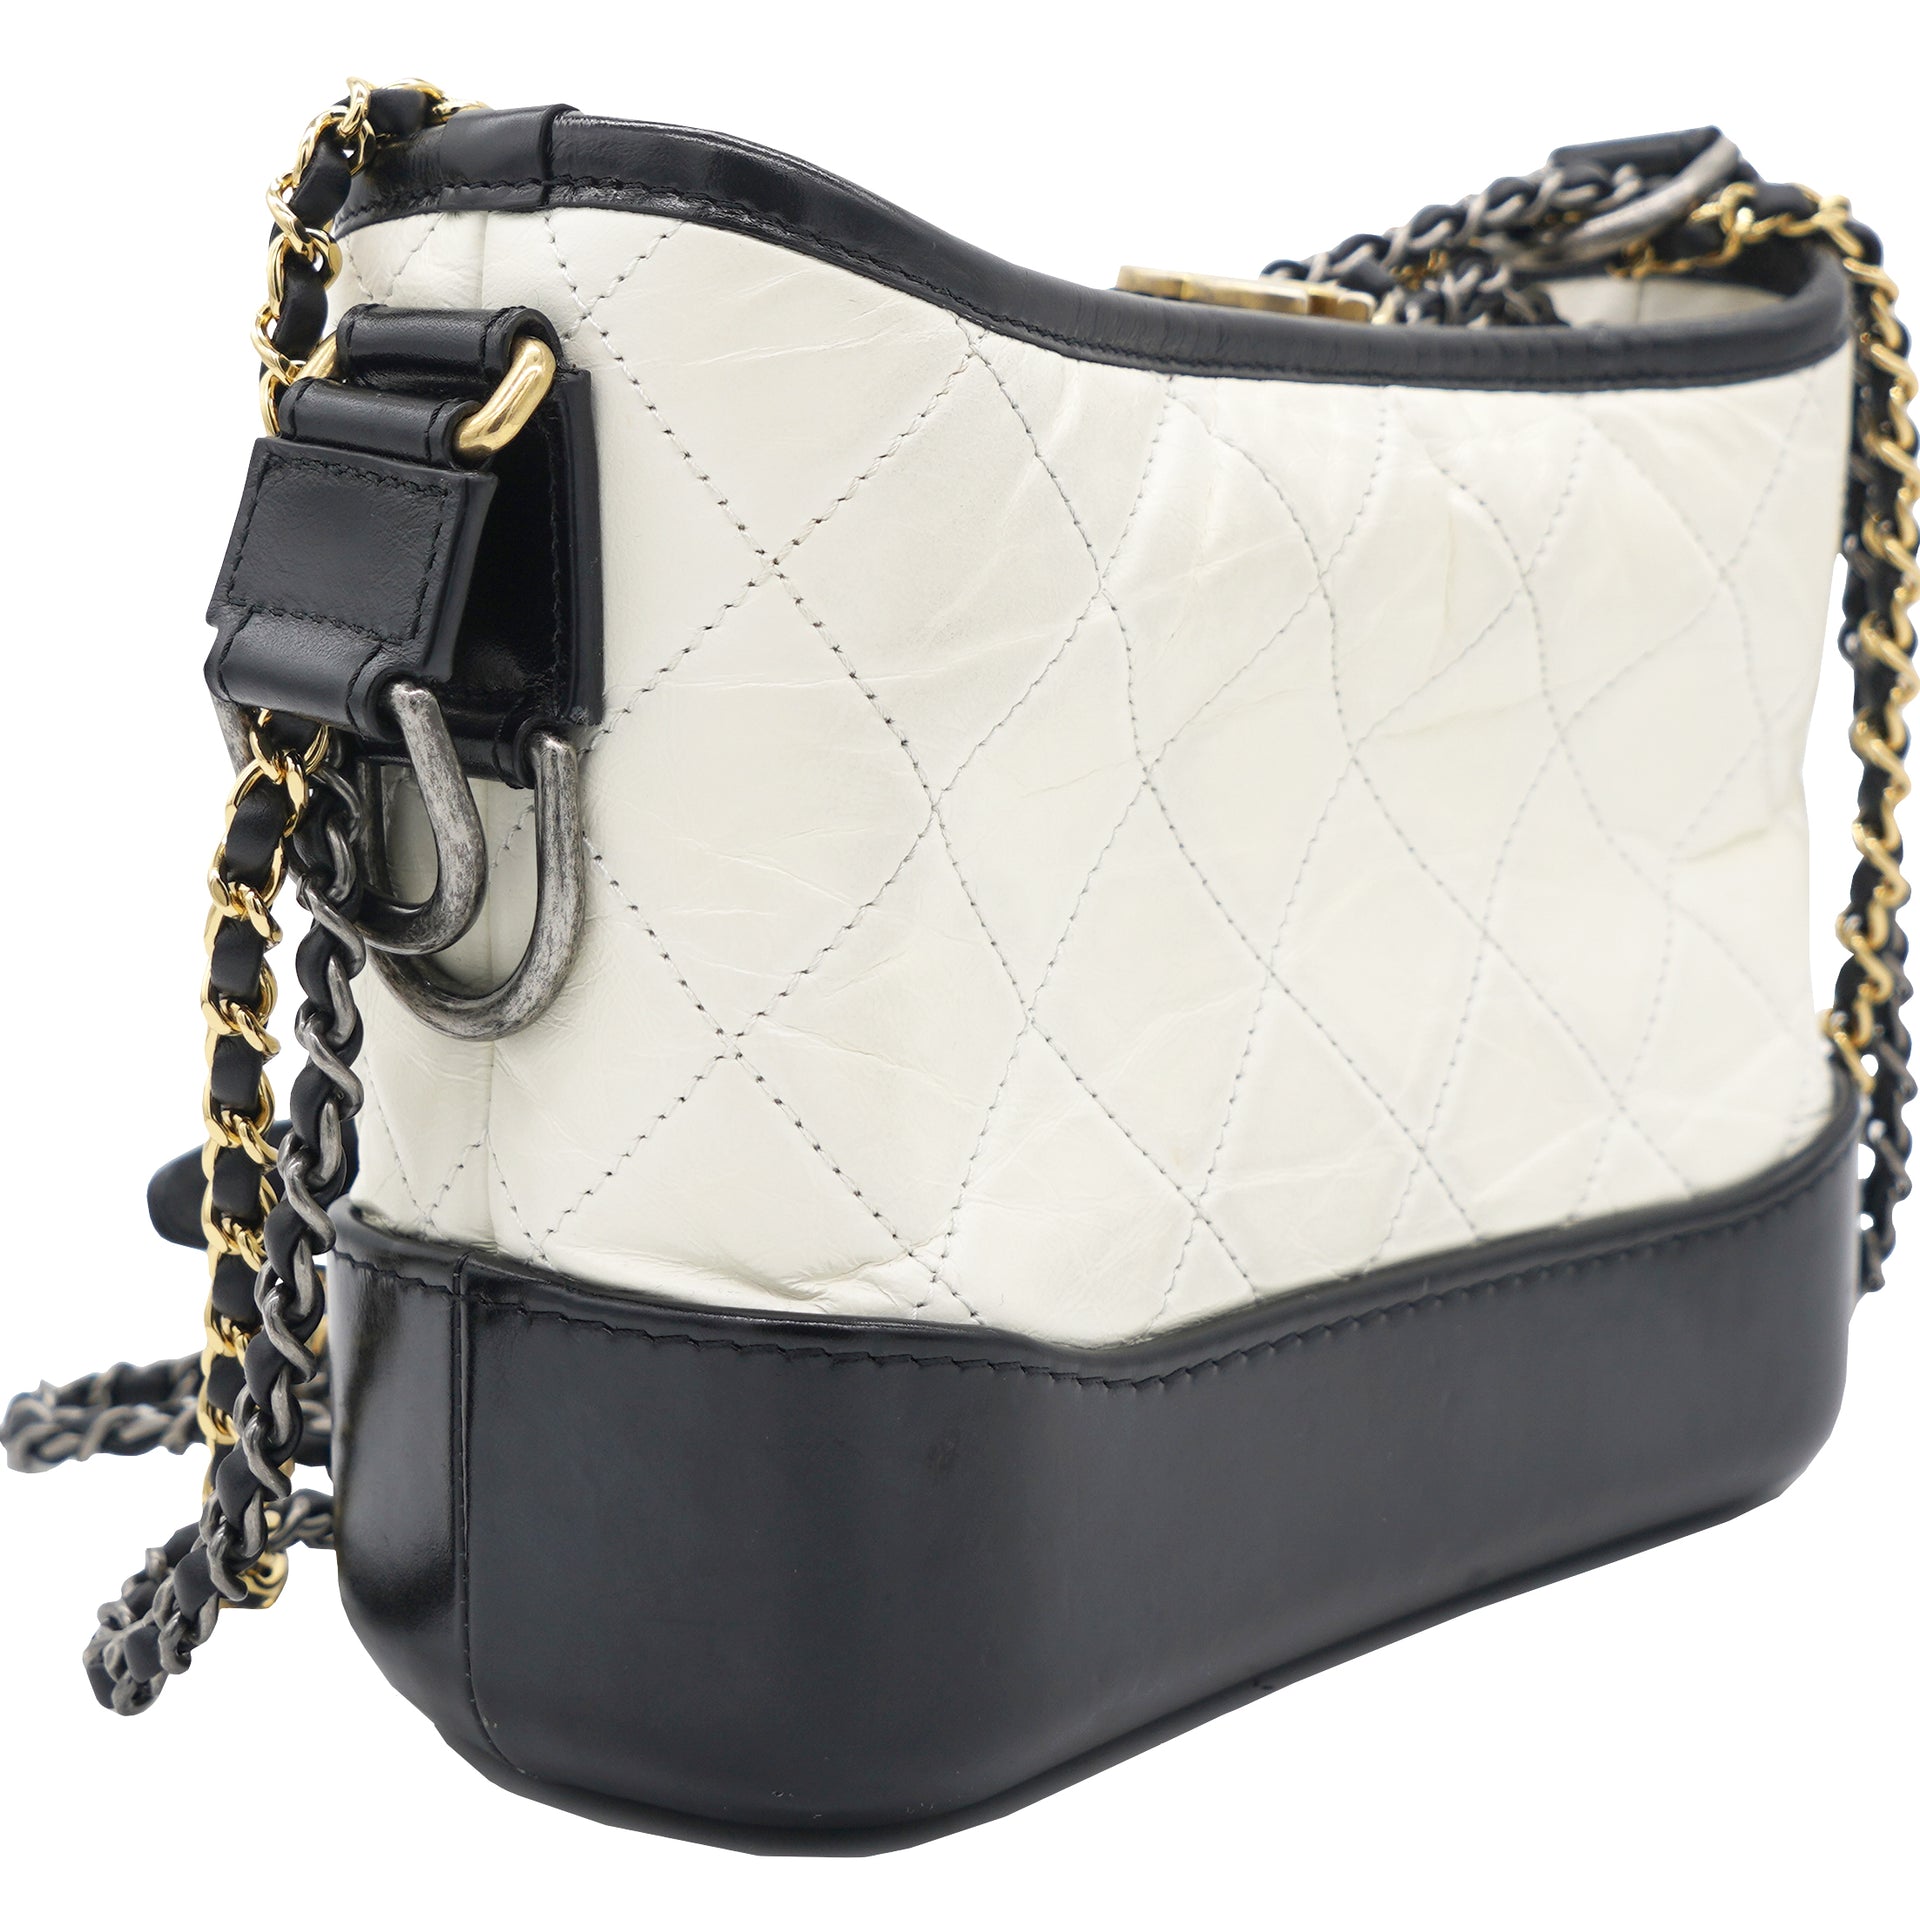 CHANEL Gabrielle Black White Quilted Calfskin Large Shopper Tote Bag